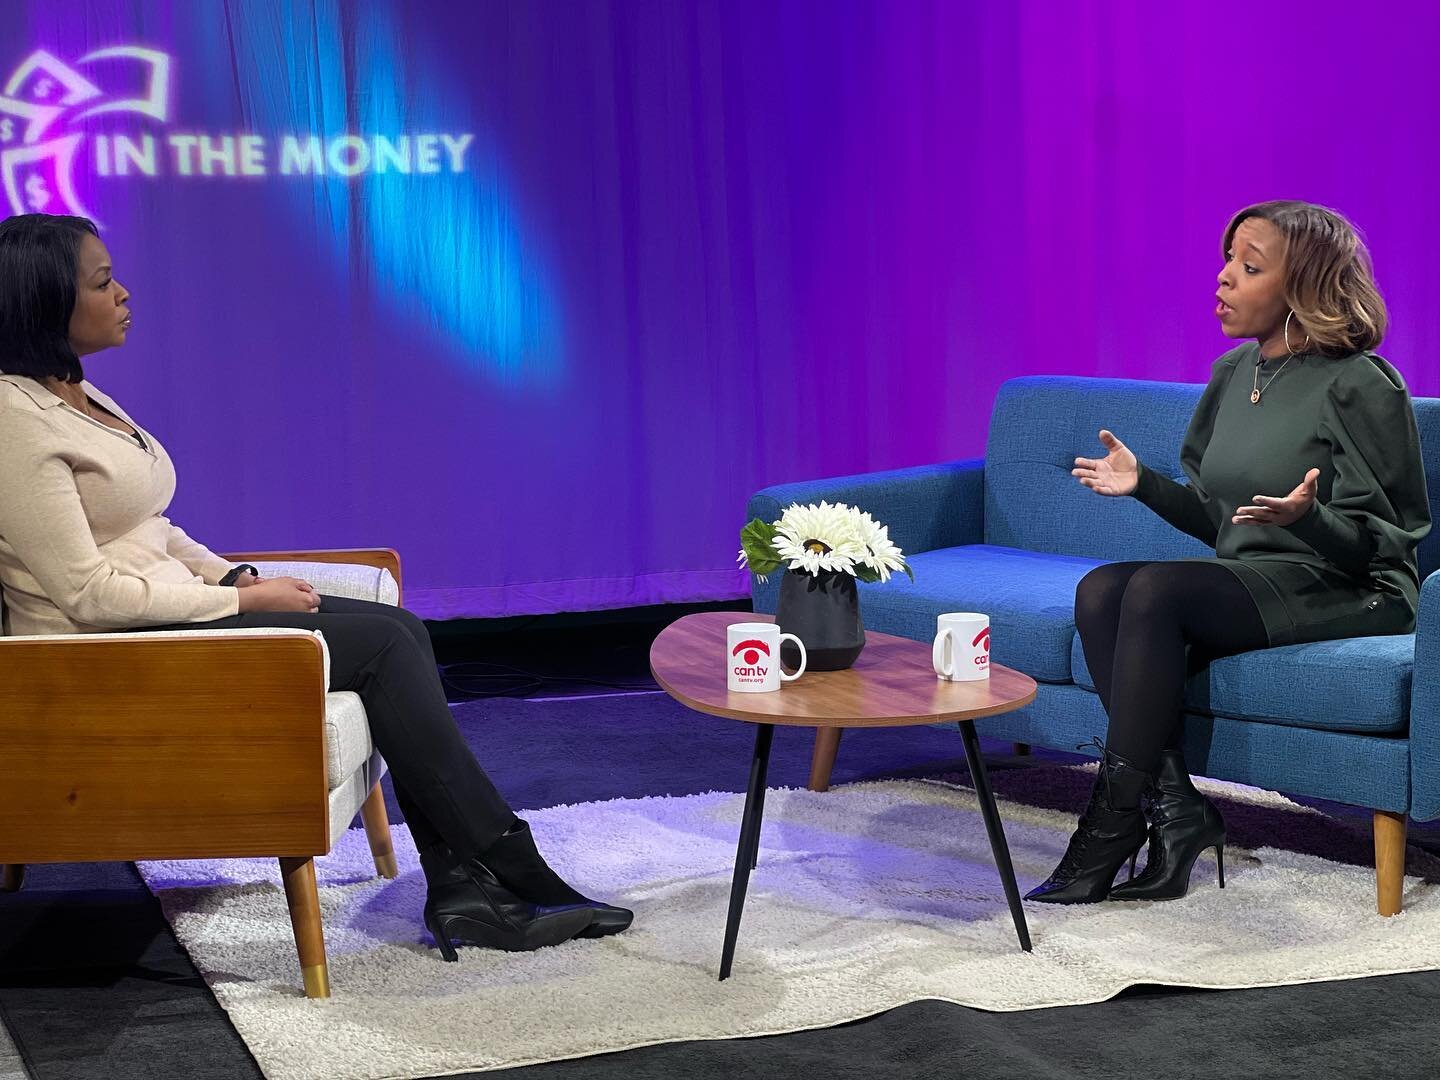 #BTS&hellip;&hellip;&hellip;..
In the Money with Kimberly Loftis @cantvchicago 💚

Thank you Kimberly for the invitation to add to the #debt conversation tonight! 

If you or anyone you know is struggling with debt this show will be a must see! #Stay